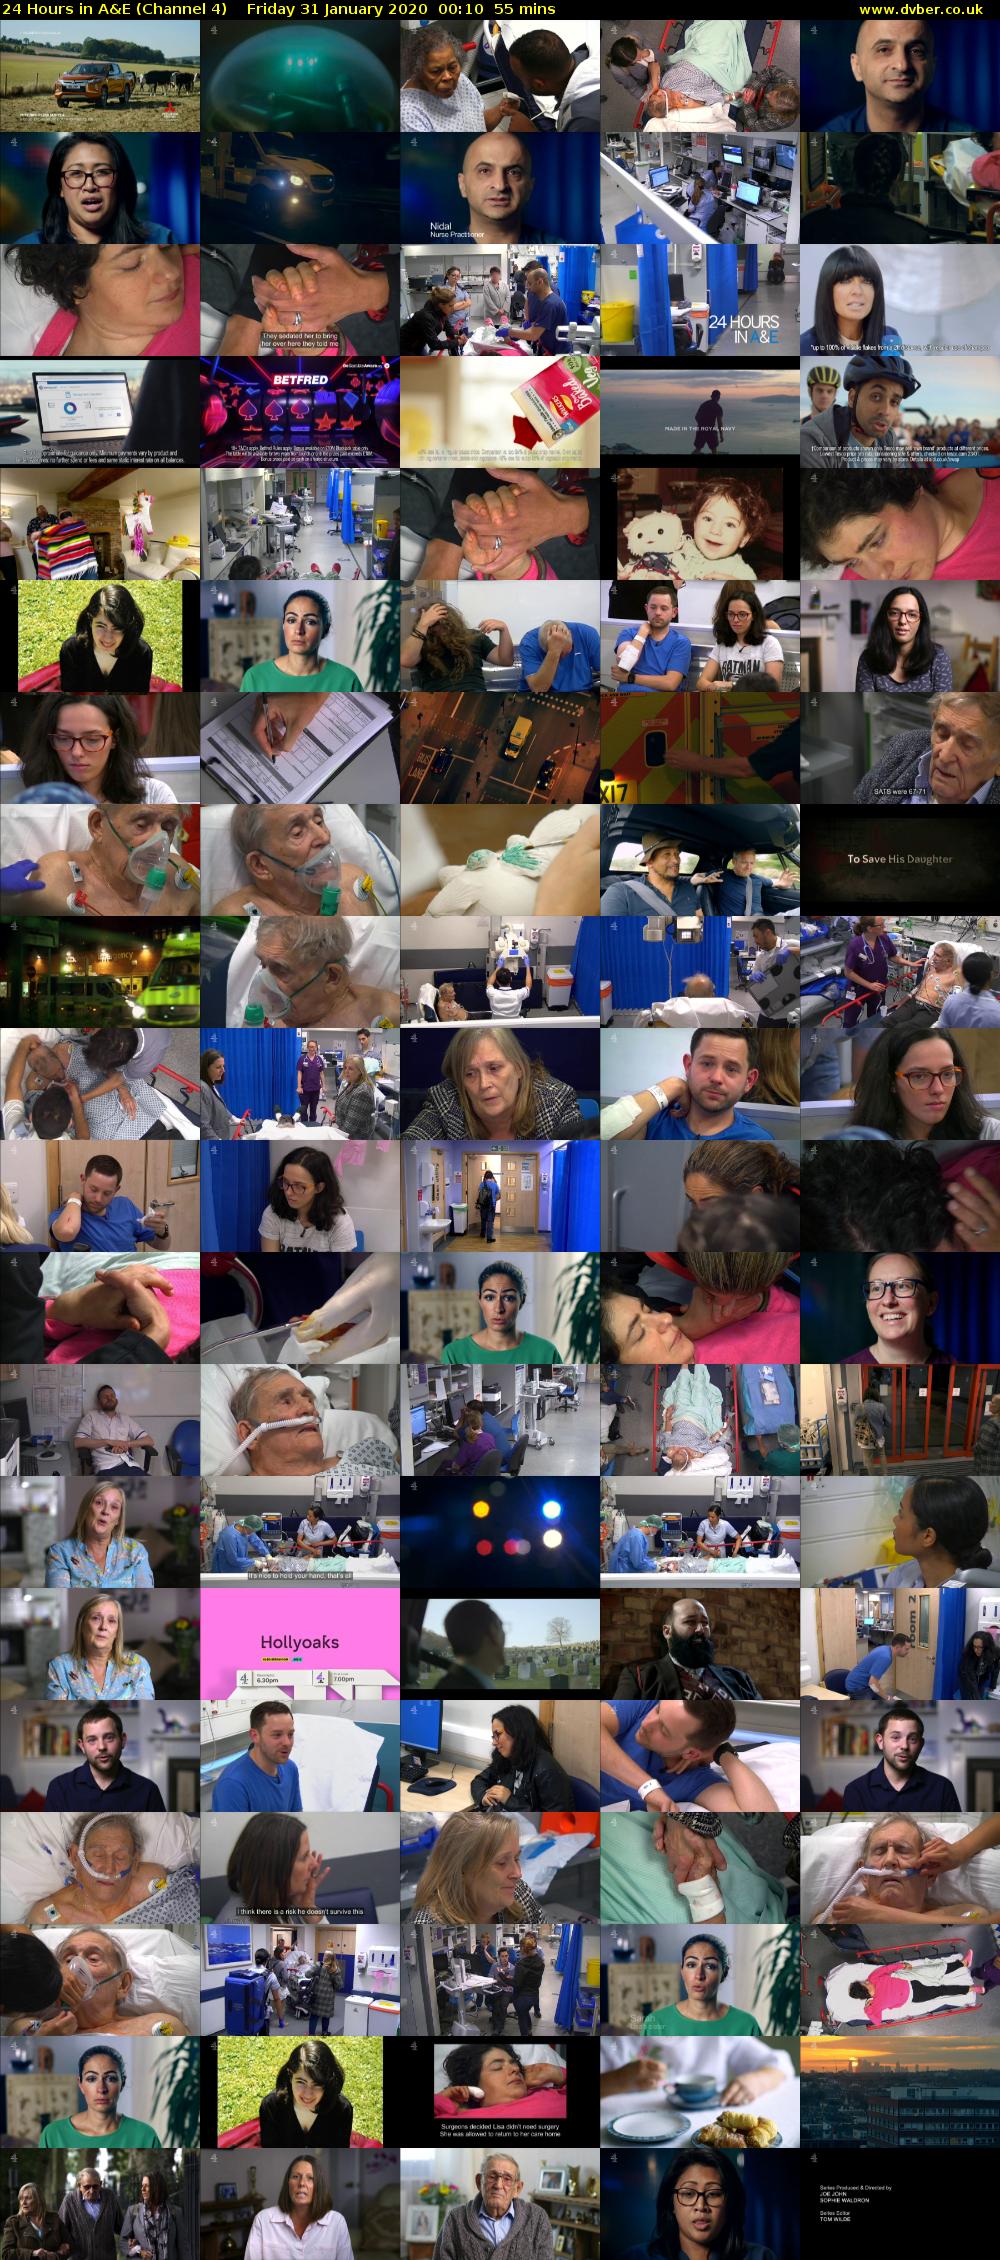 24 Hours in A&E (Channel 4) Friday 31 January 2020 00:10 - 01:05